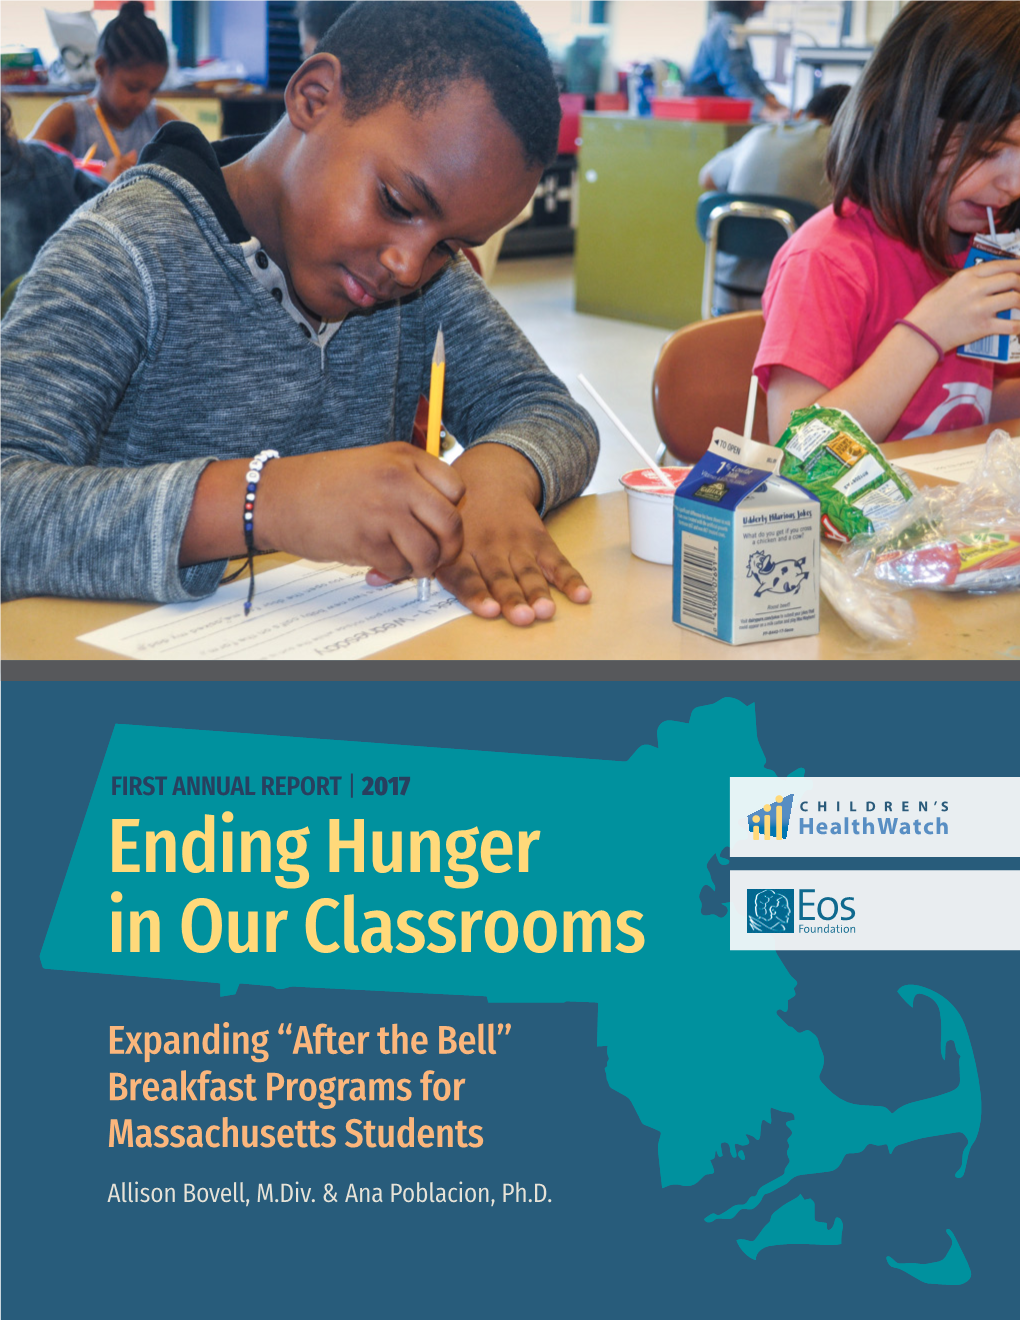 FIRST ANNUAL REPORT | 2017 Ending Hunger in Our Classrooms